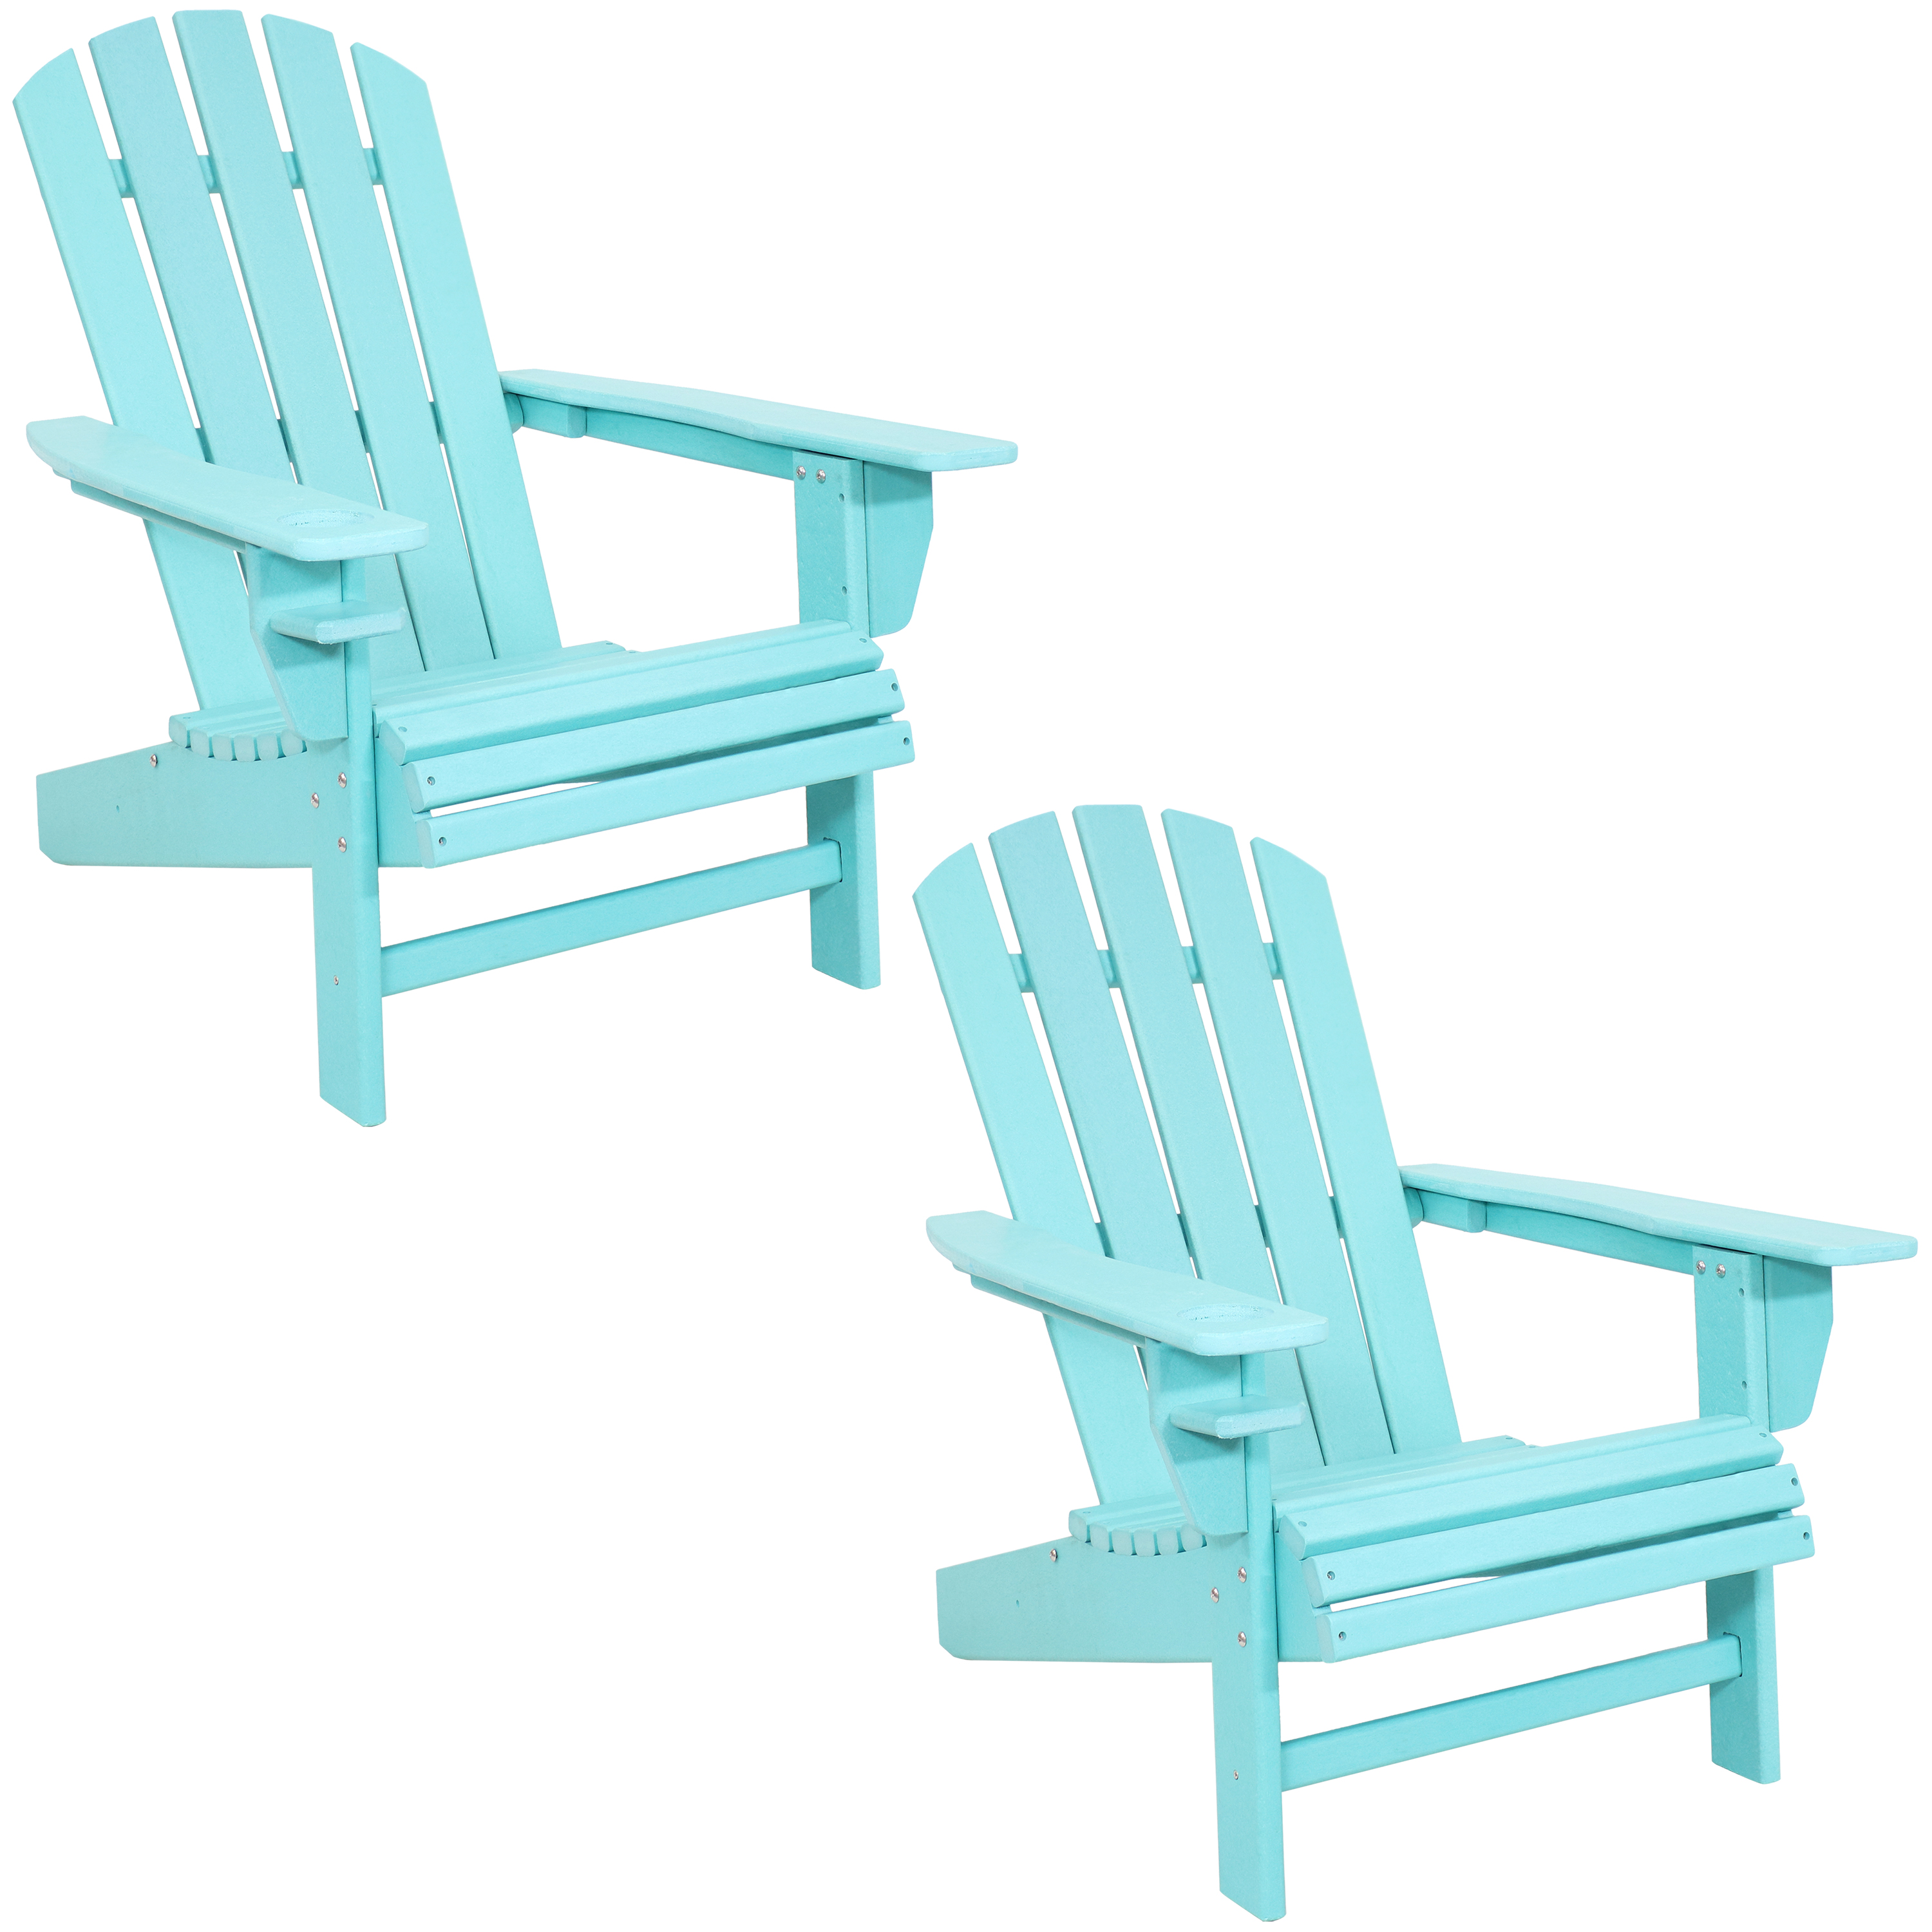 Sunnydaze All-Weather Outdoor Adirondack Chair with Drink Holder - Turquoise - Set of 2 - image 1 of 11